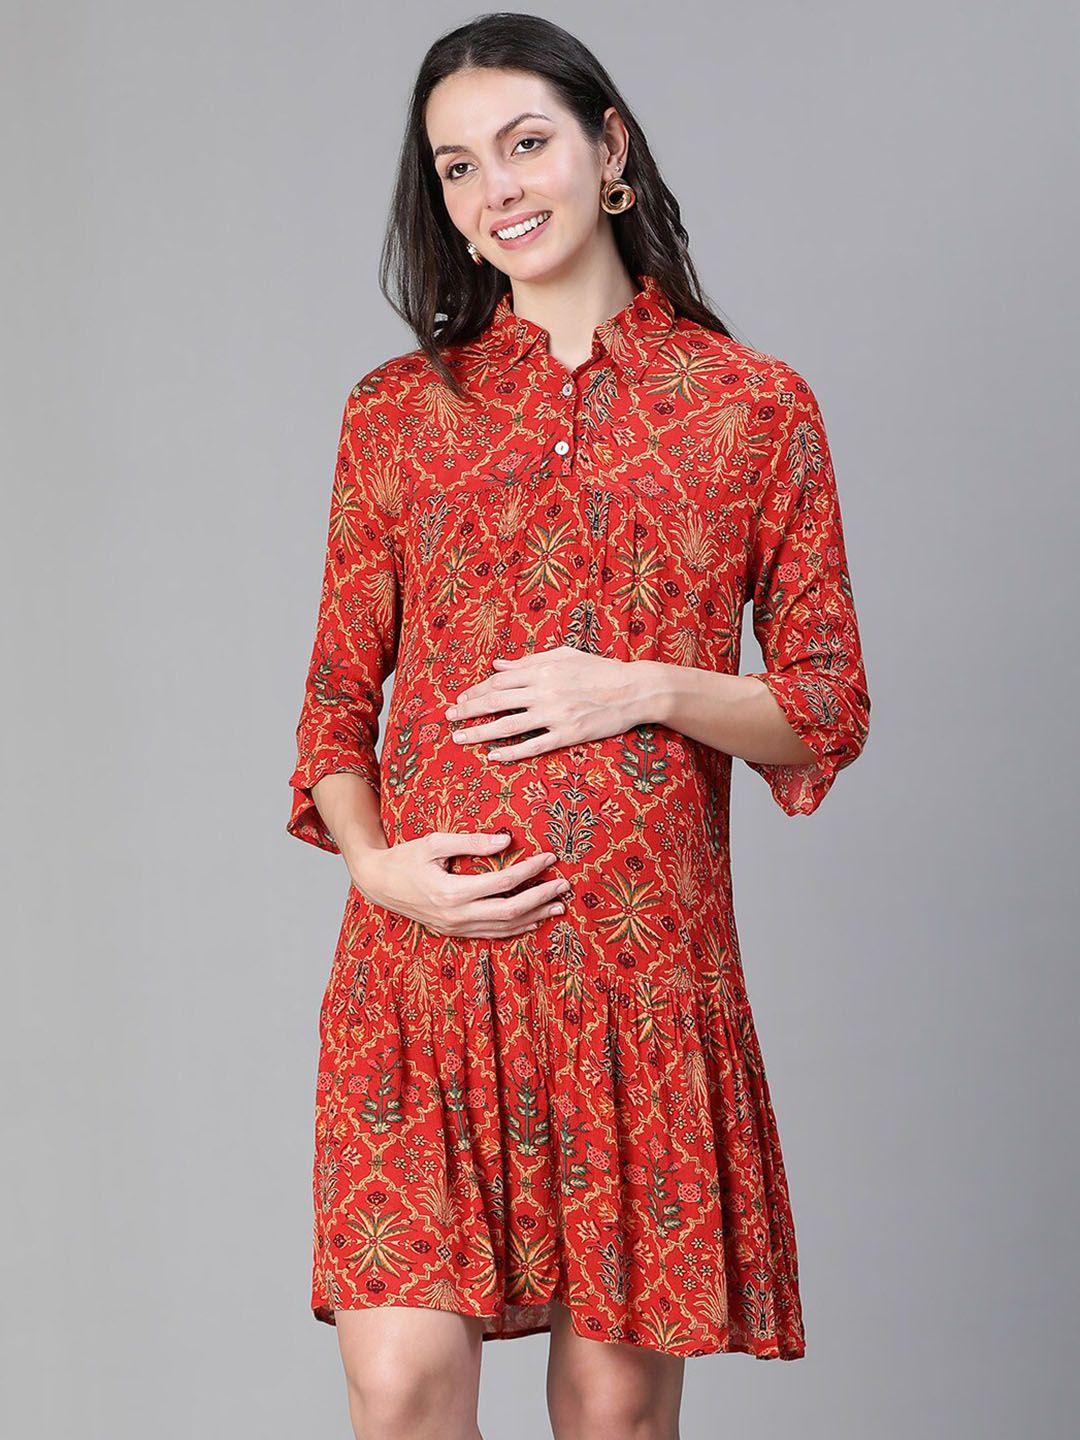 oxolloxo-floral-printed-maternity-shirt-dress